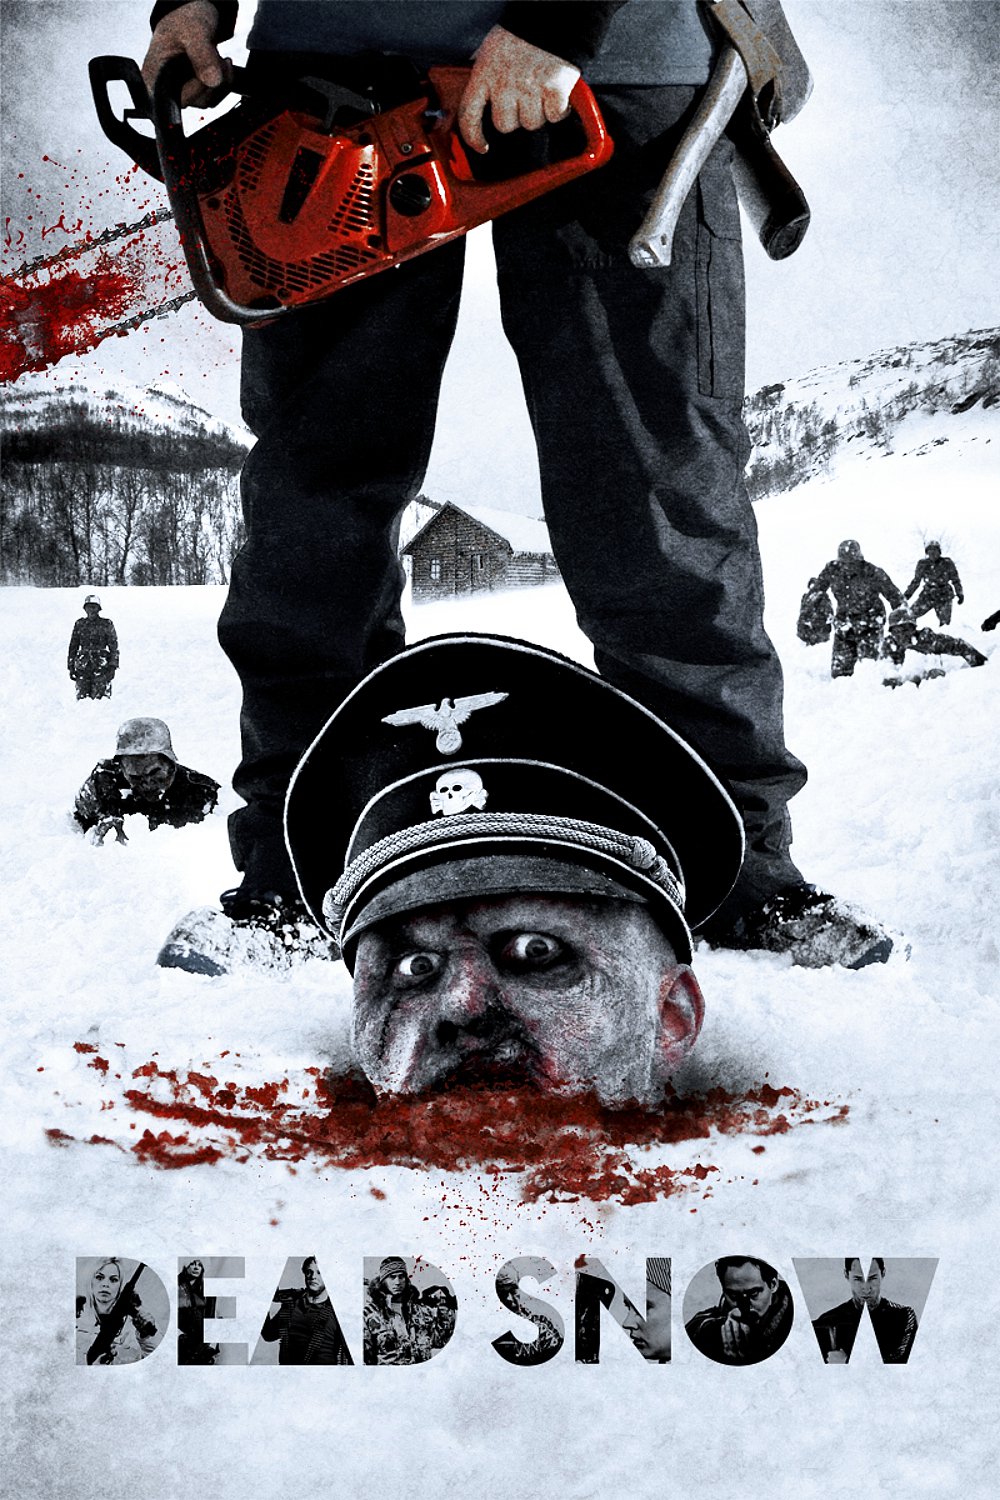 Poster for the movie "Dead Snow"